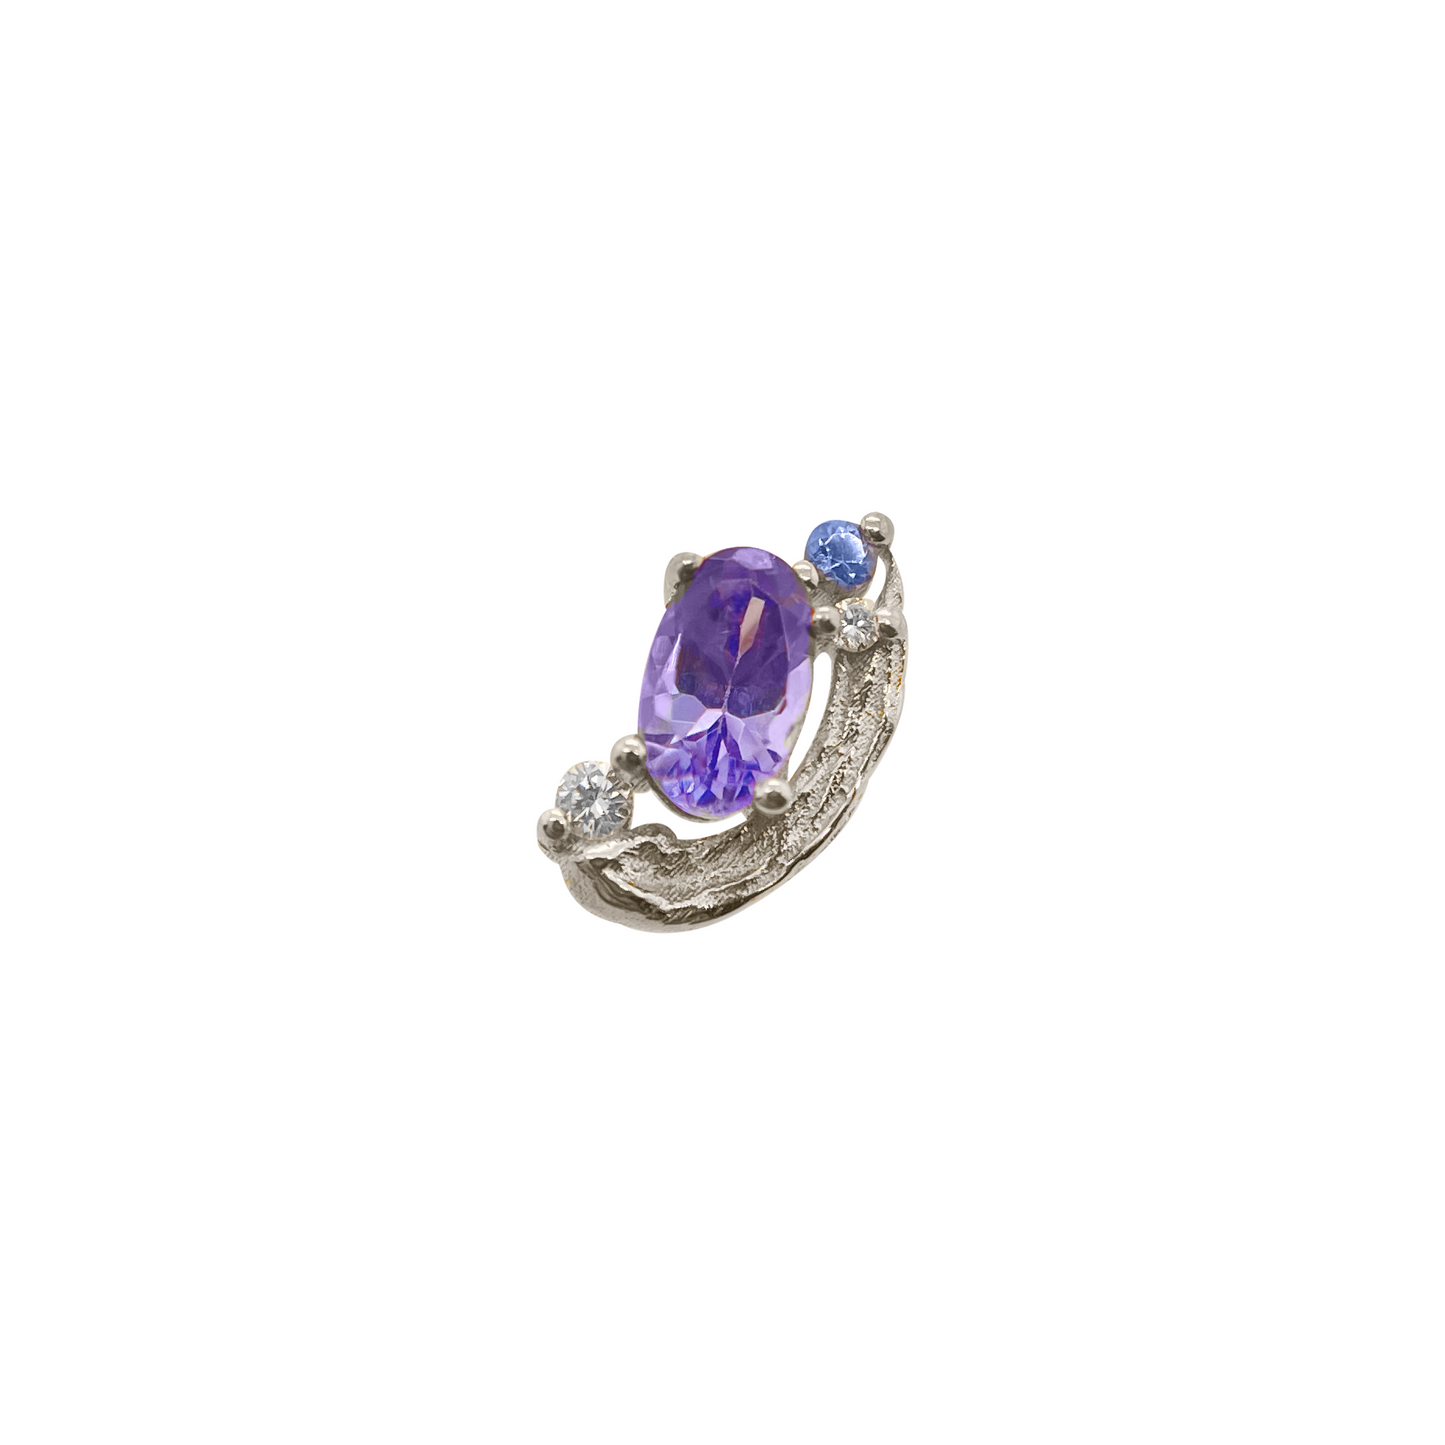 Periwinkle with Tanzanite, Diamond, and Blue Sapphire Threaded End